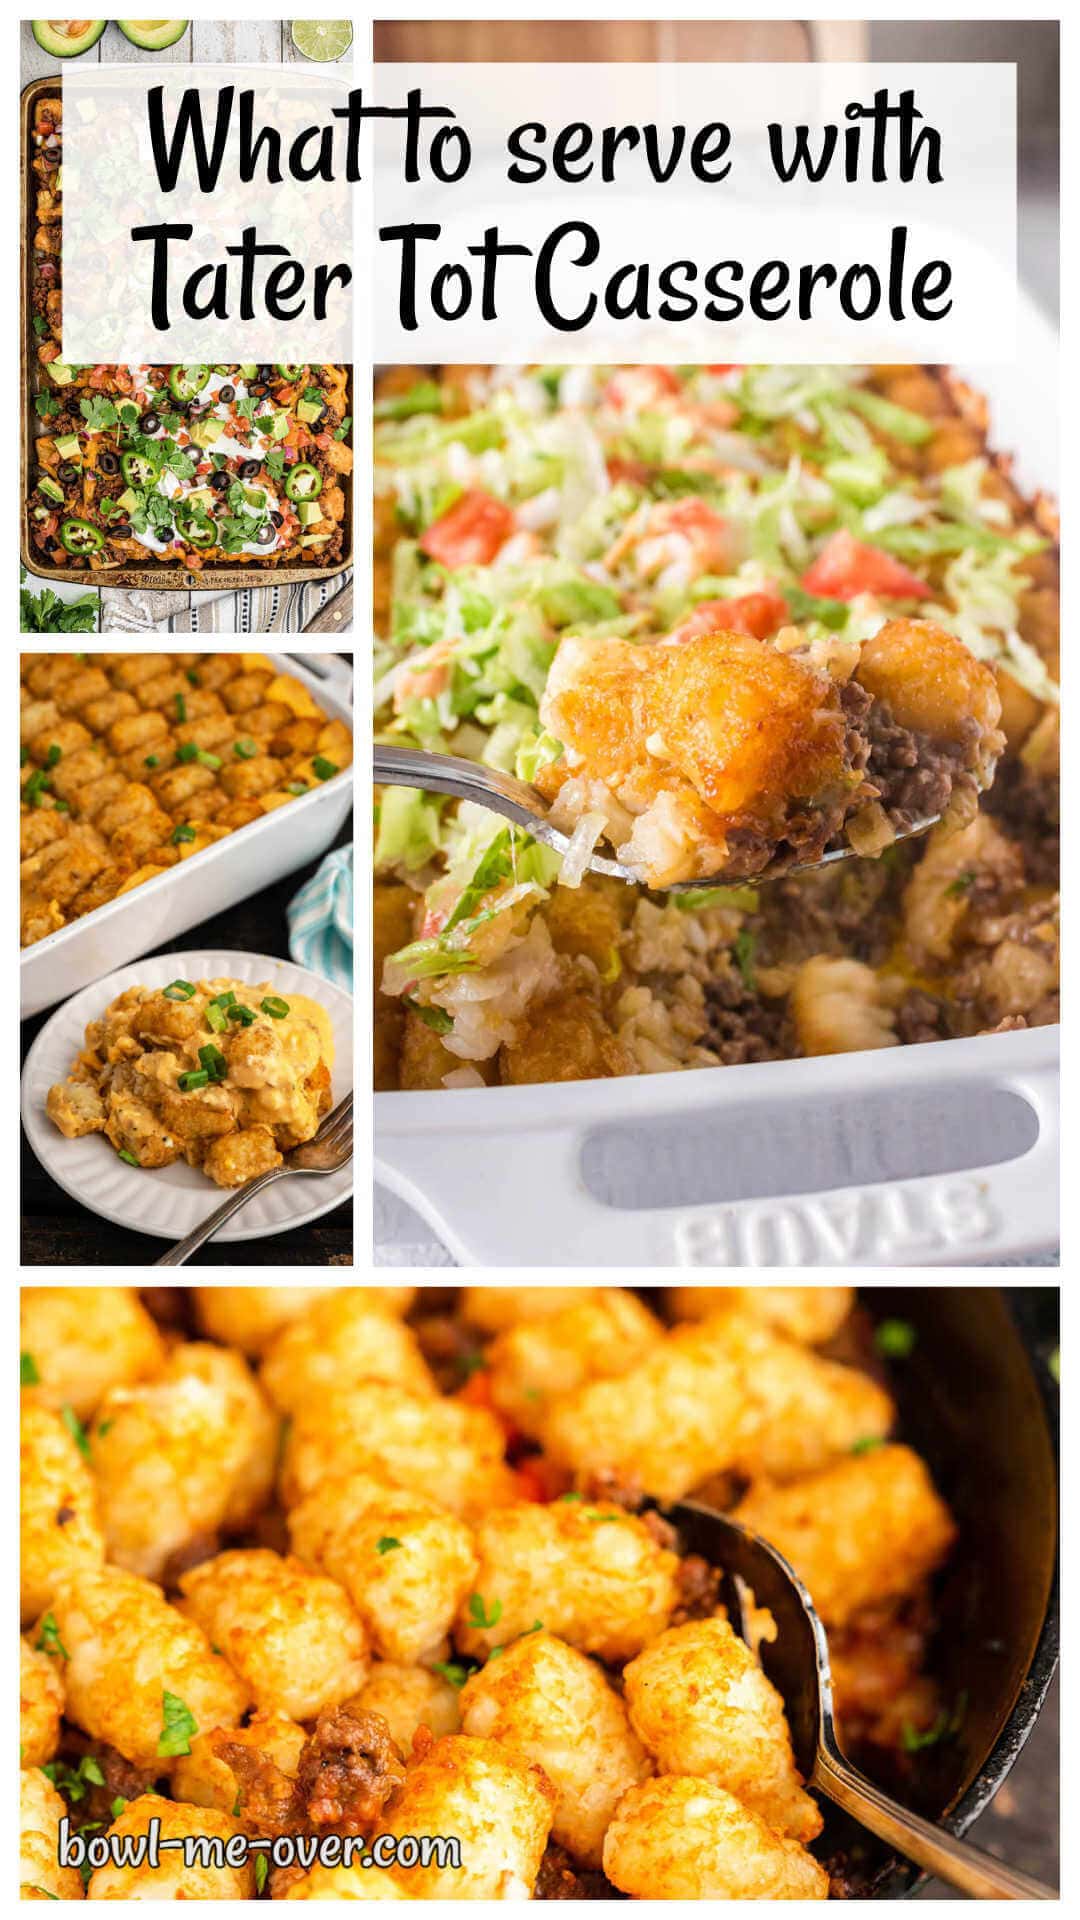 Photos of Tater Tot Casserole with print overlay for social media.